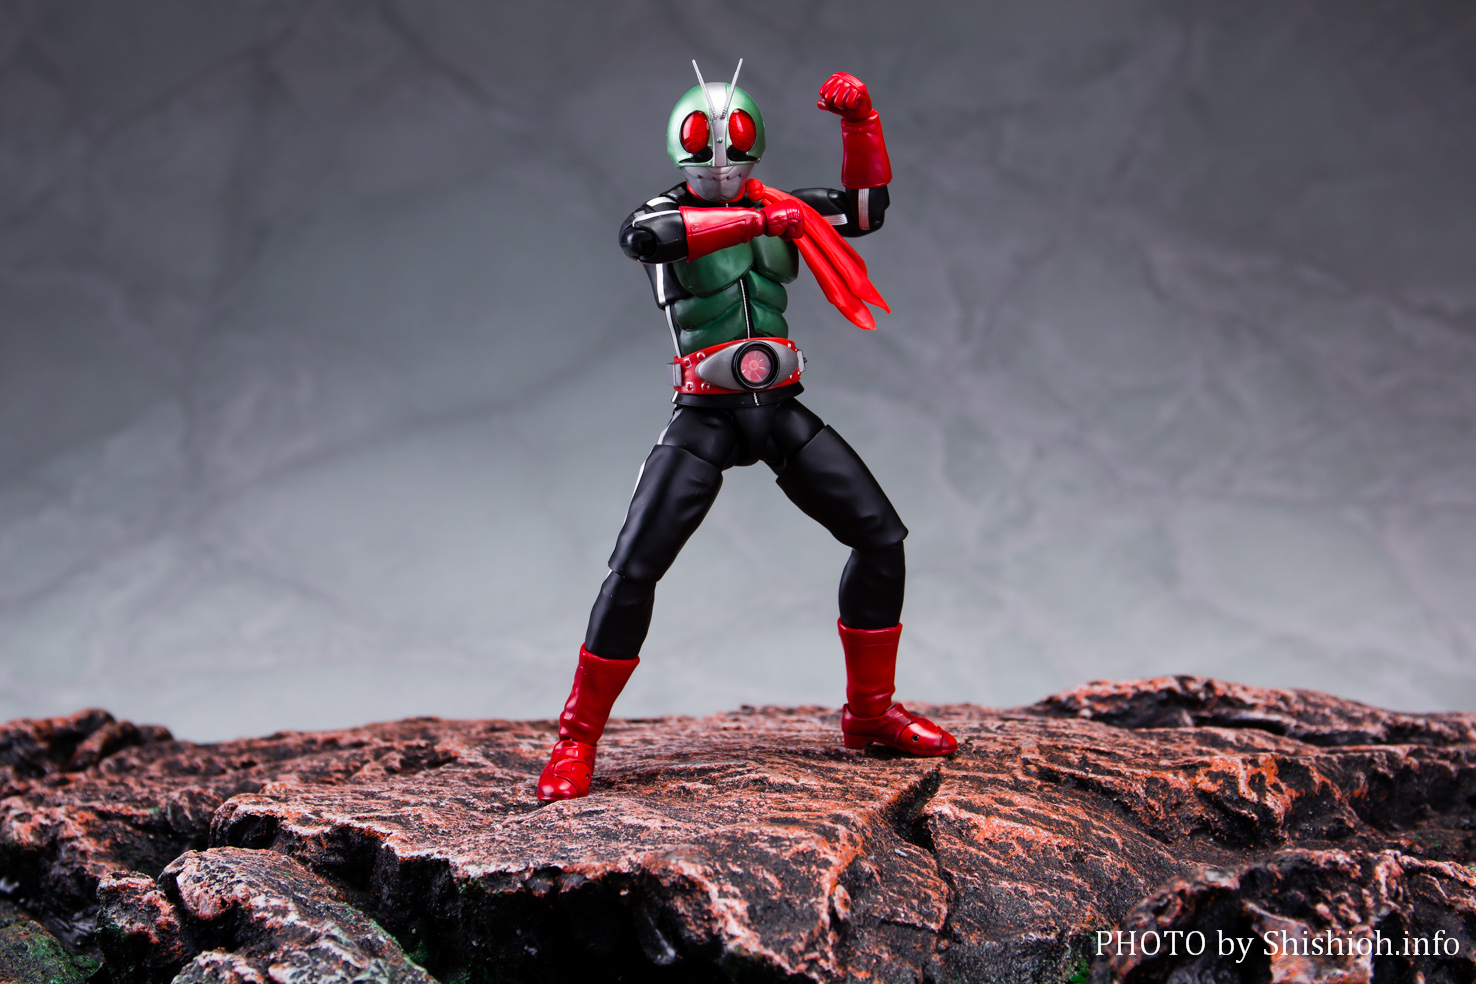 S.H.Figuarts 真骨彫 仮面ライダー新1号 新2号 セット - library